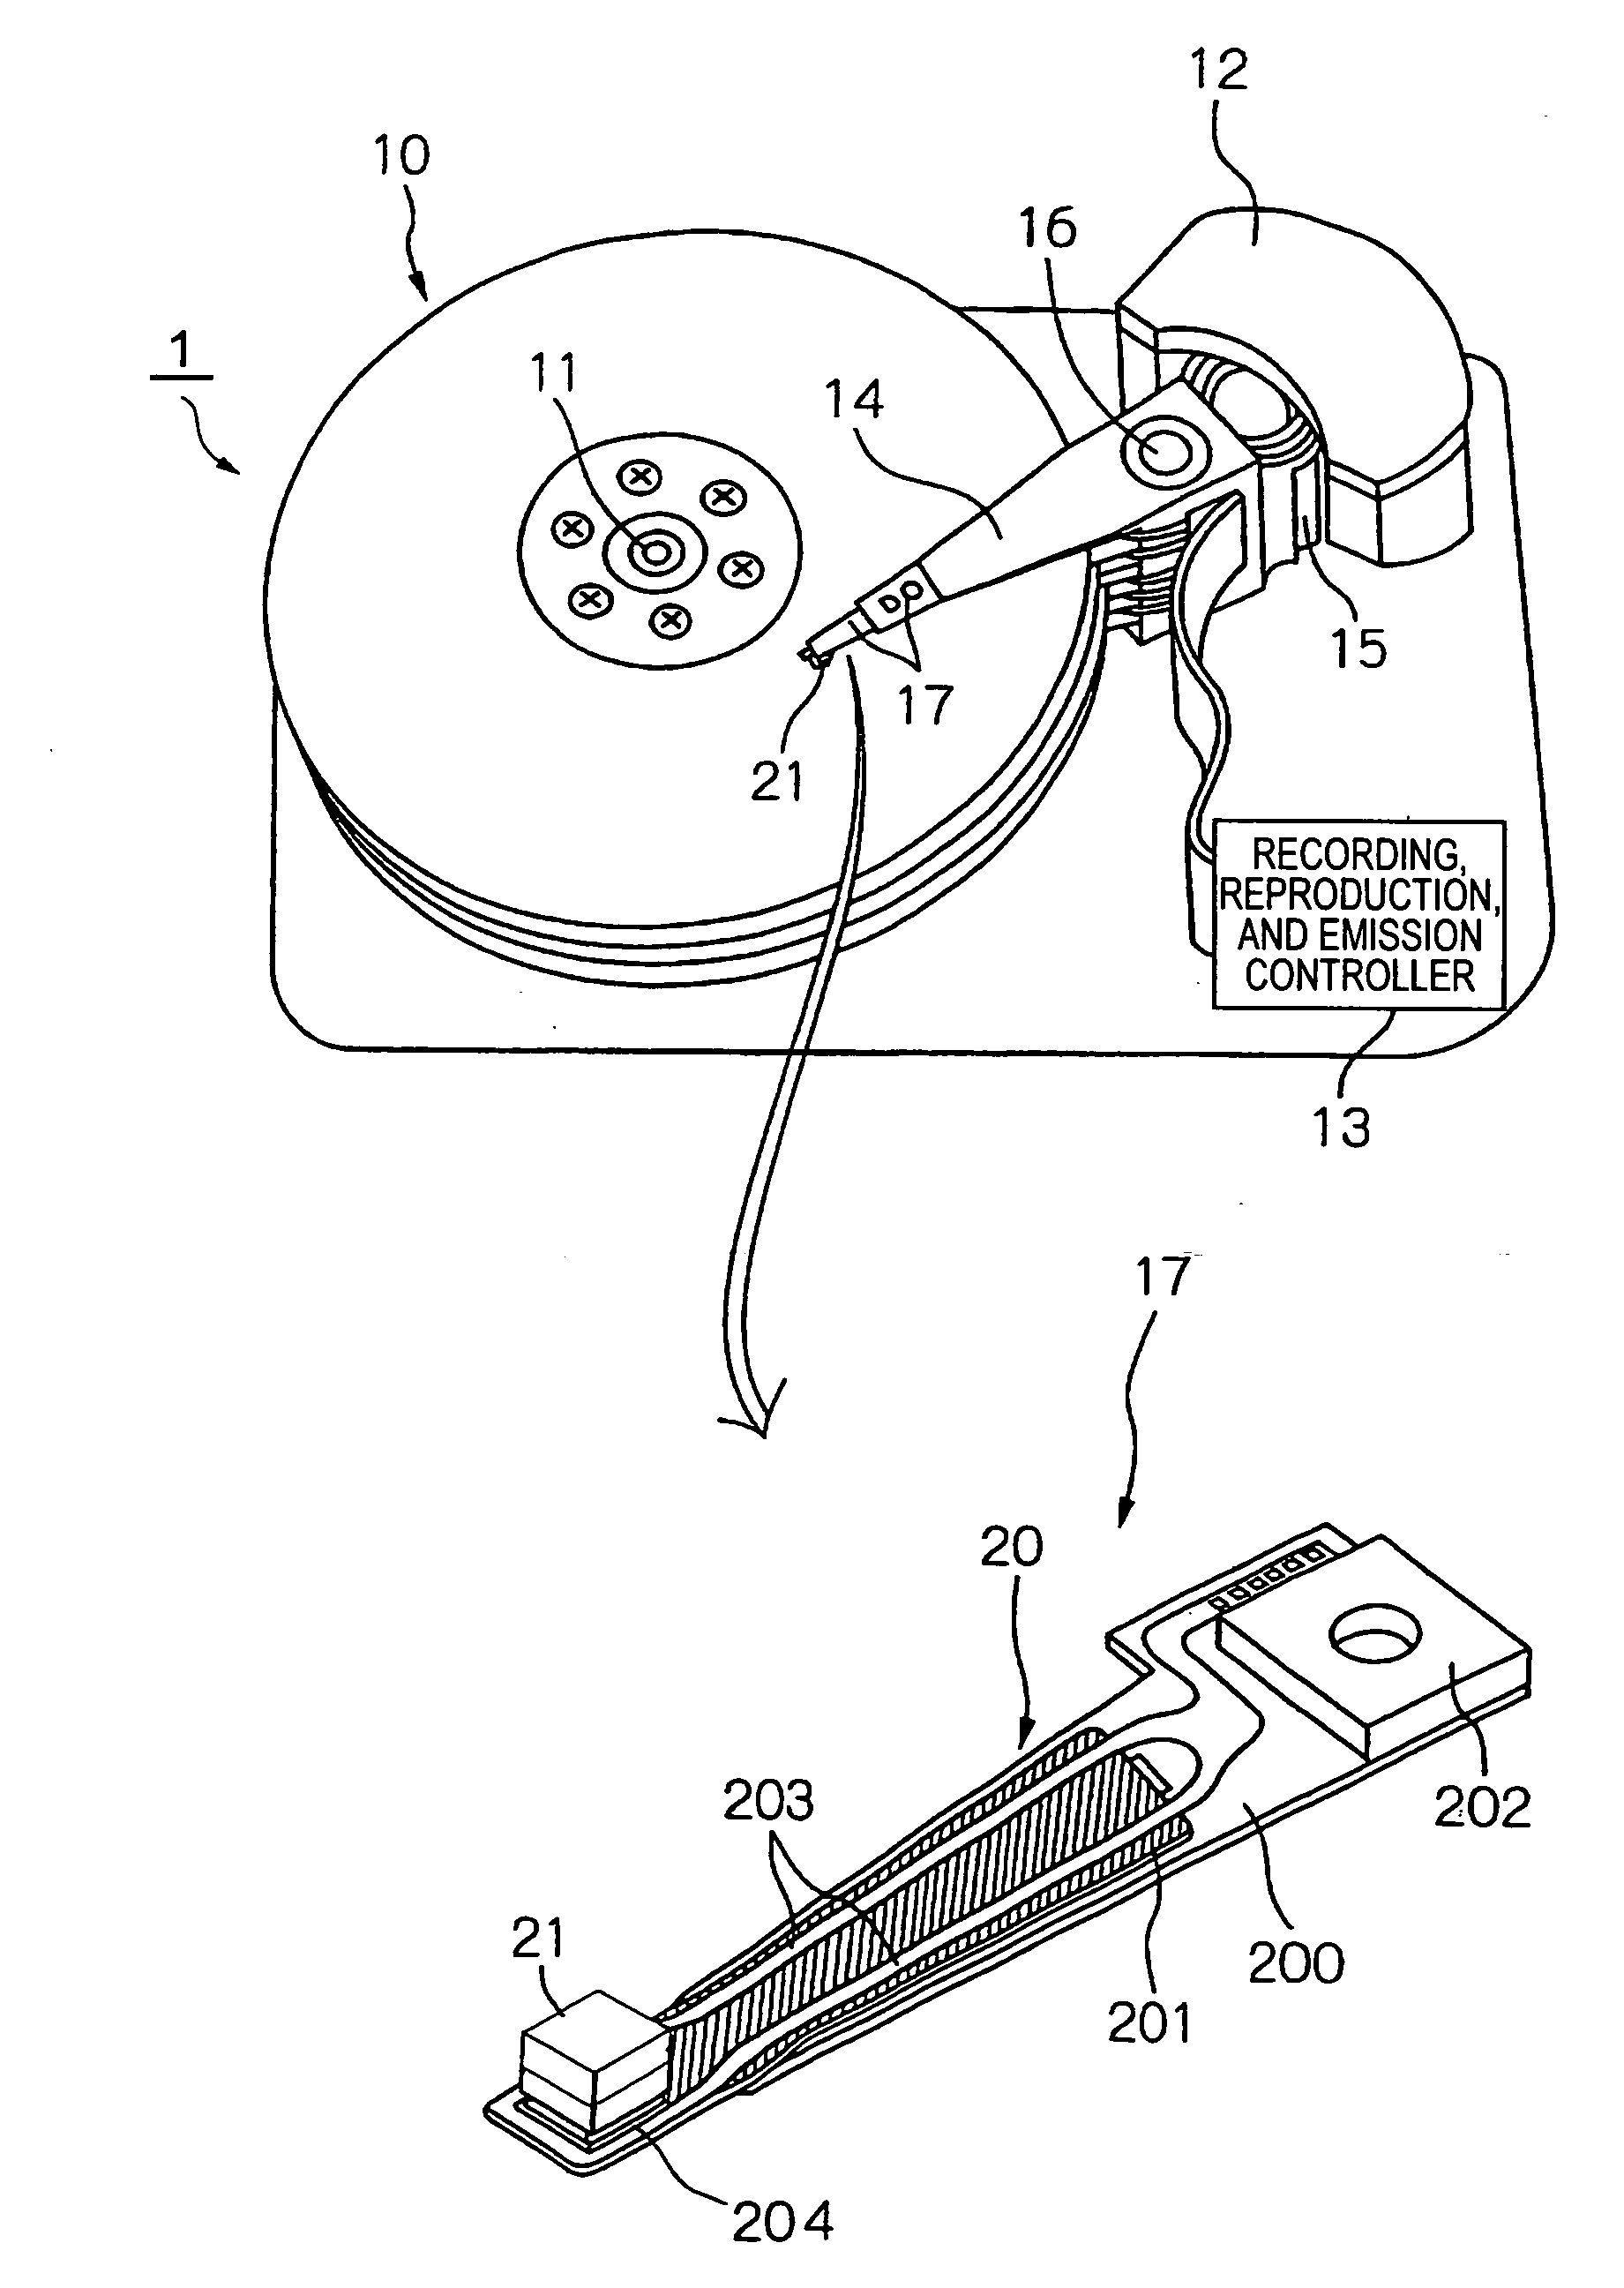 Near-field light generator plate, thermally assisted magnetic head, head gimbal assembly, and hard disk drive